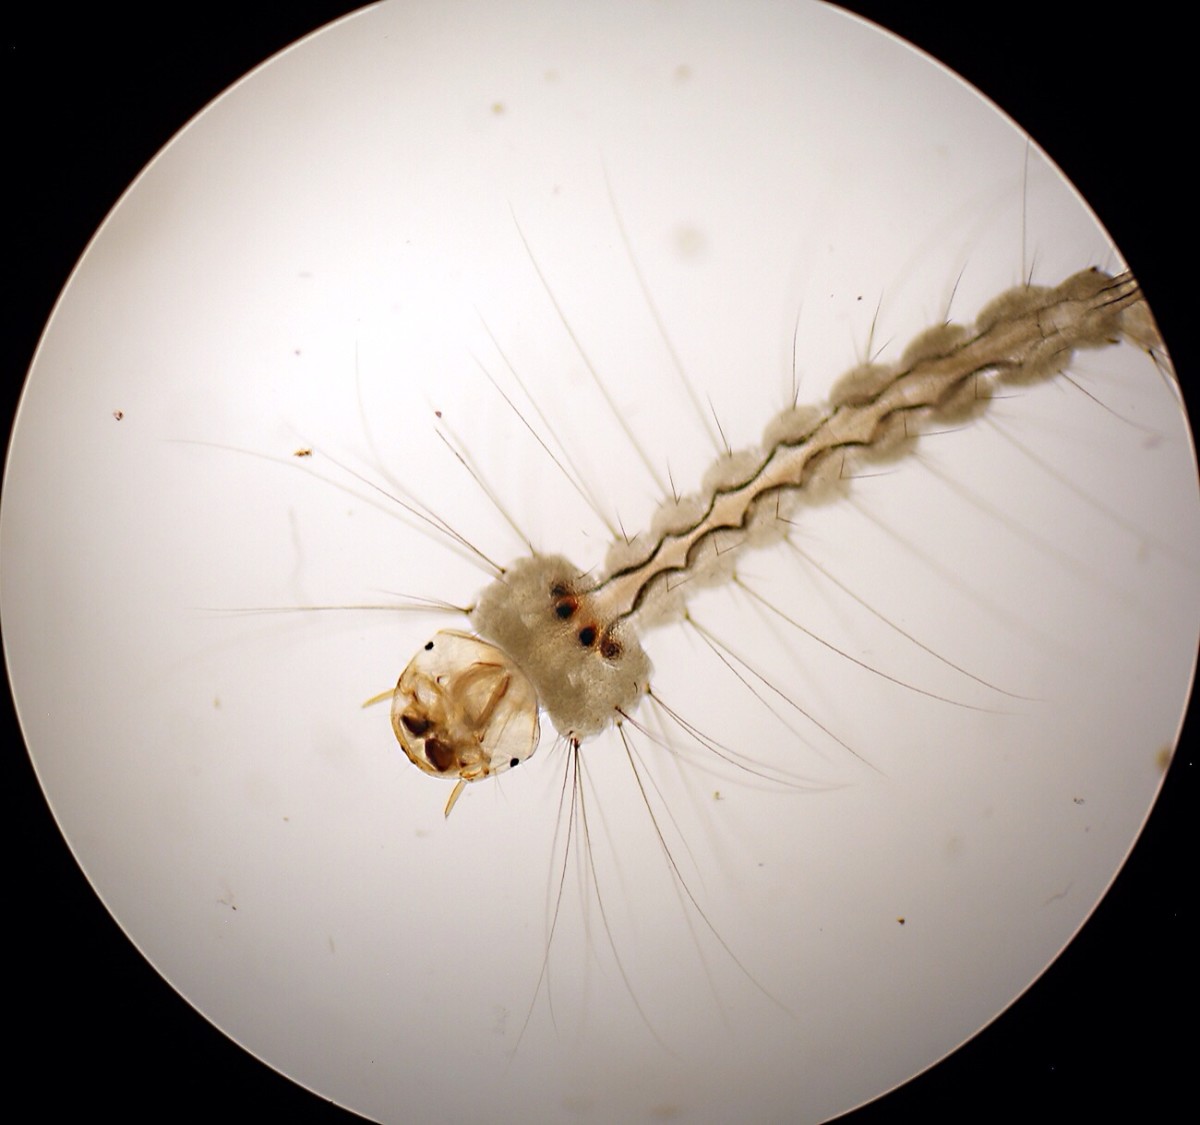 A mosquito larva viewed at 40X magnification